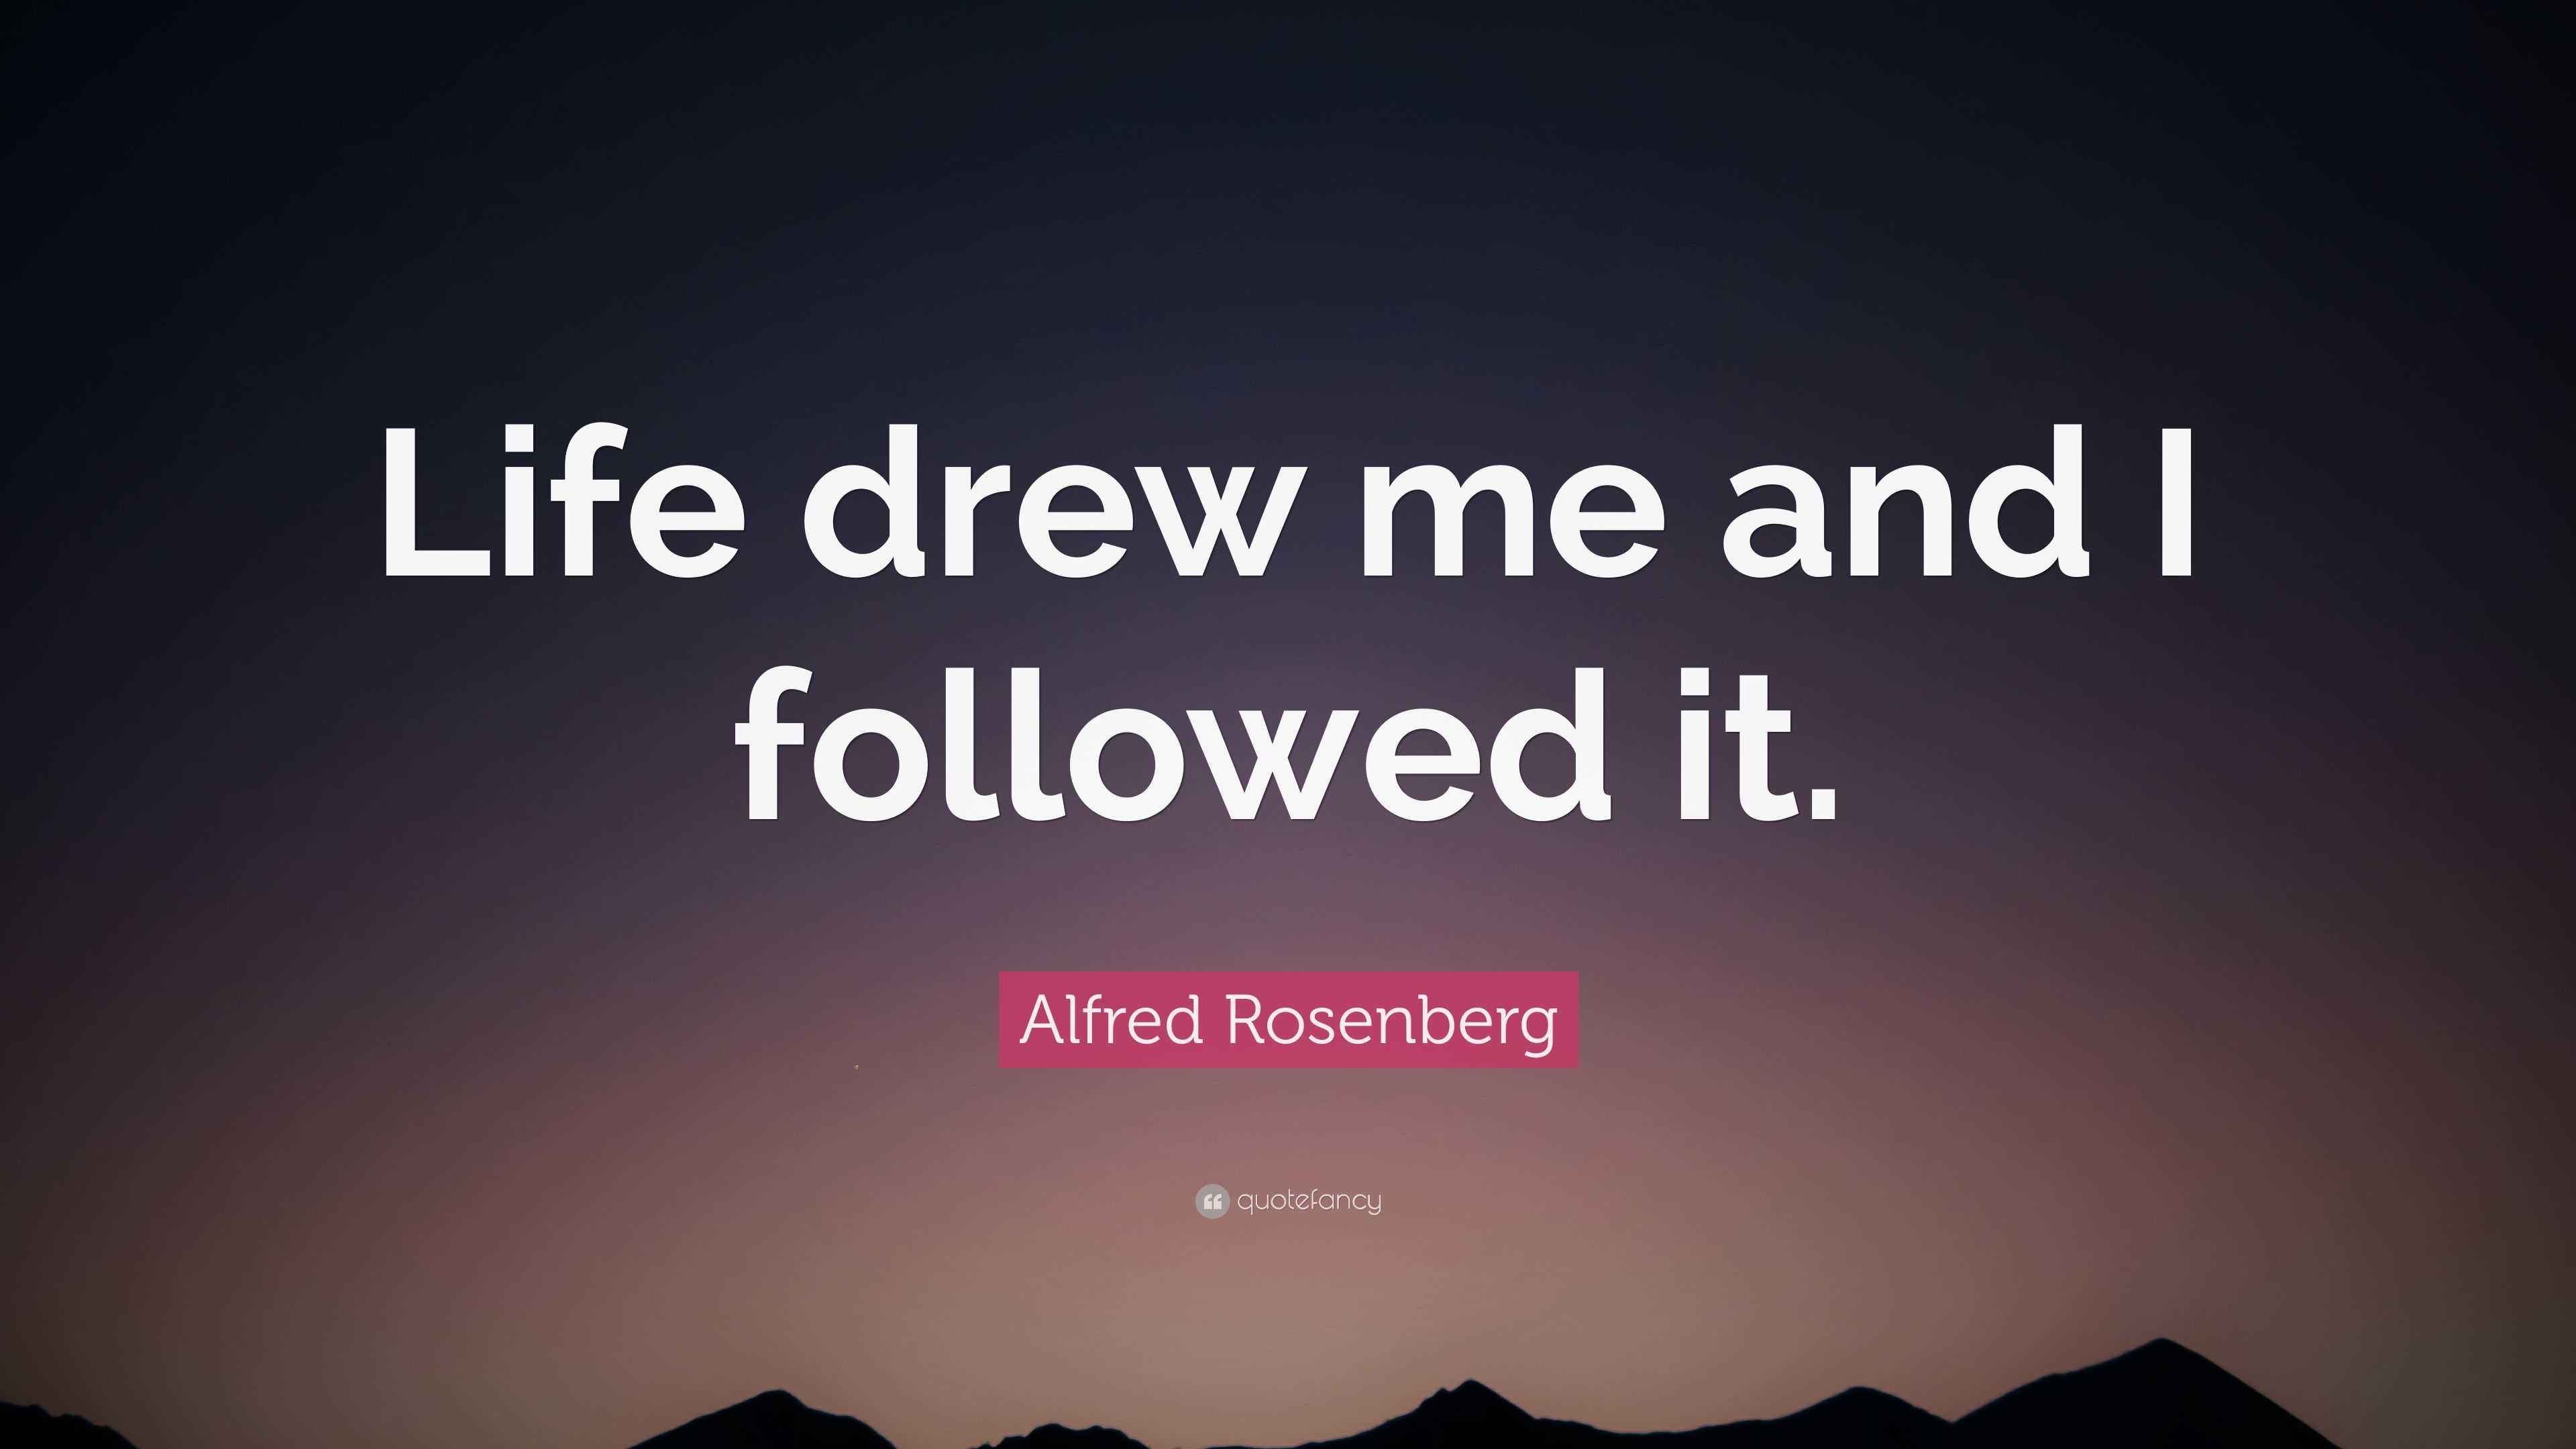 Alfred Rosenberg Quote: “Life drew me and I followed it.”